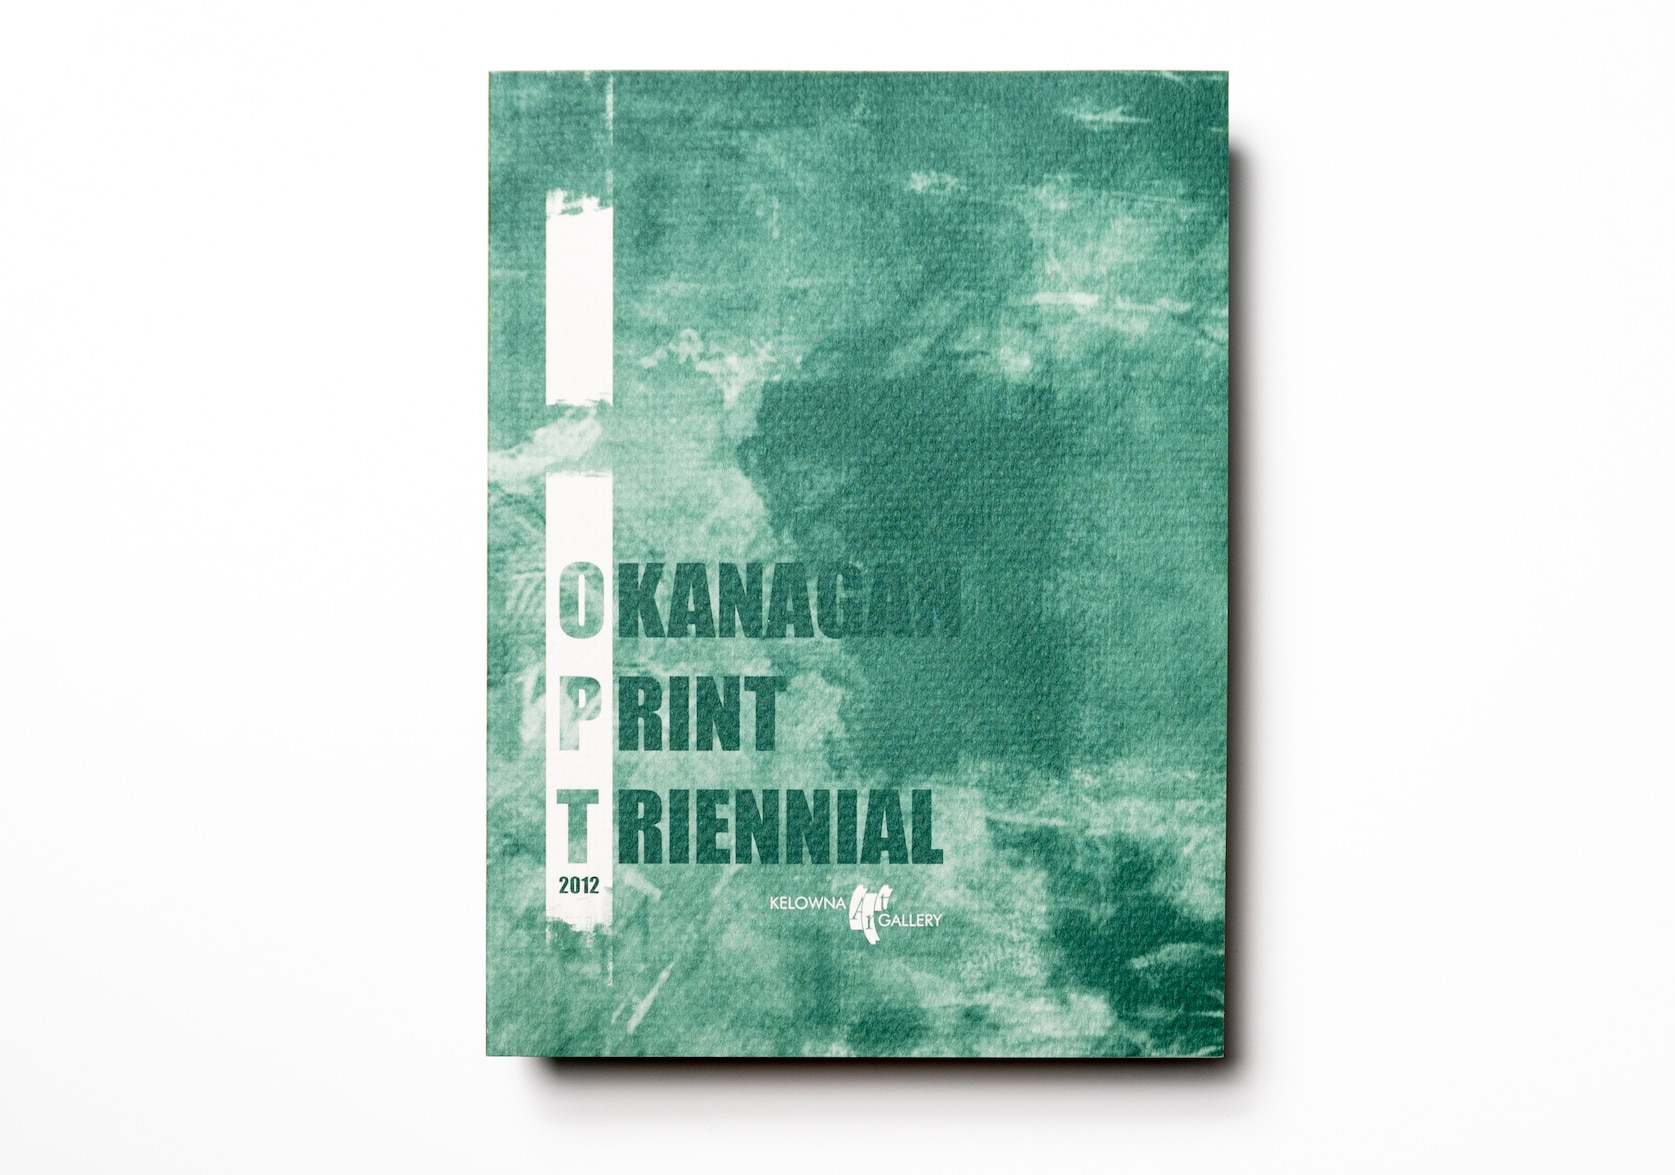 Catalogue Cover with text that reads: Okanagan Print Triennial 2012 with white & green watercolour background